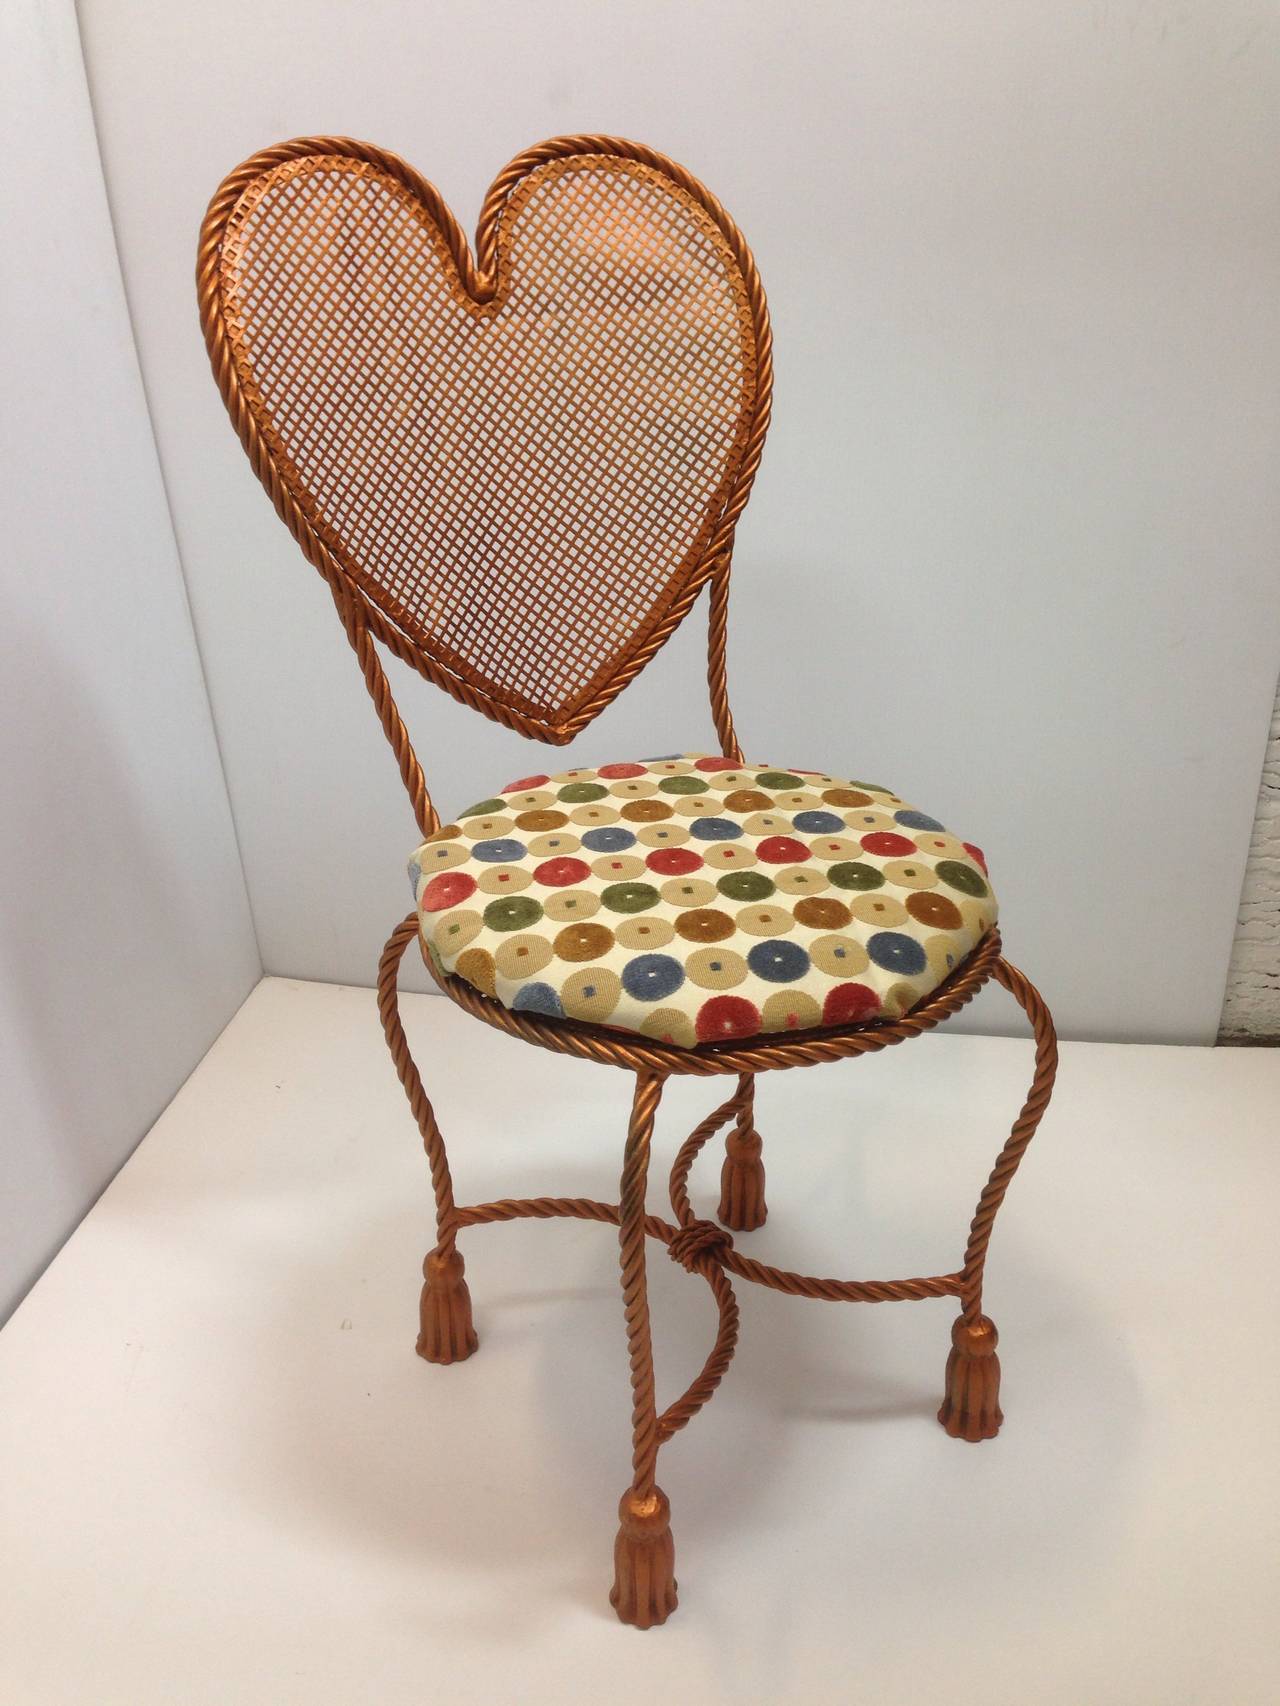 Heart Shaped Rope Chair at 1stdibs